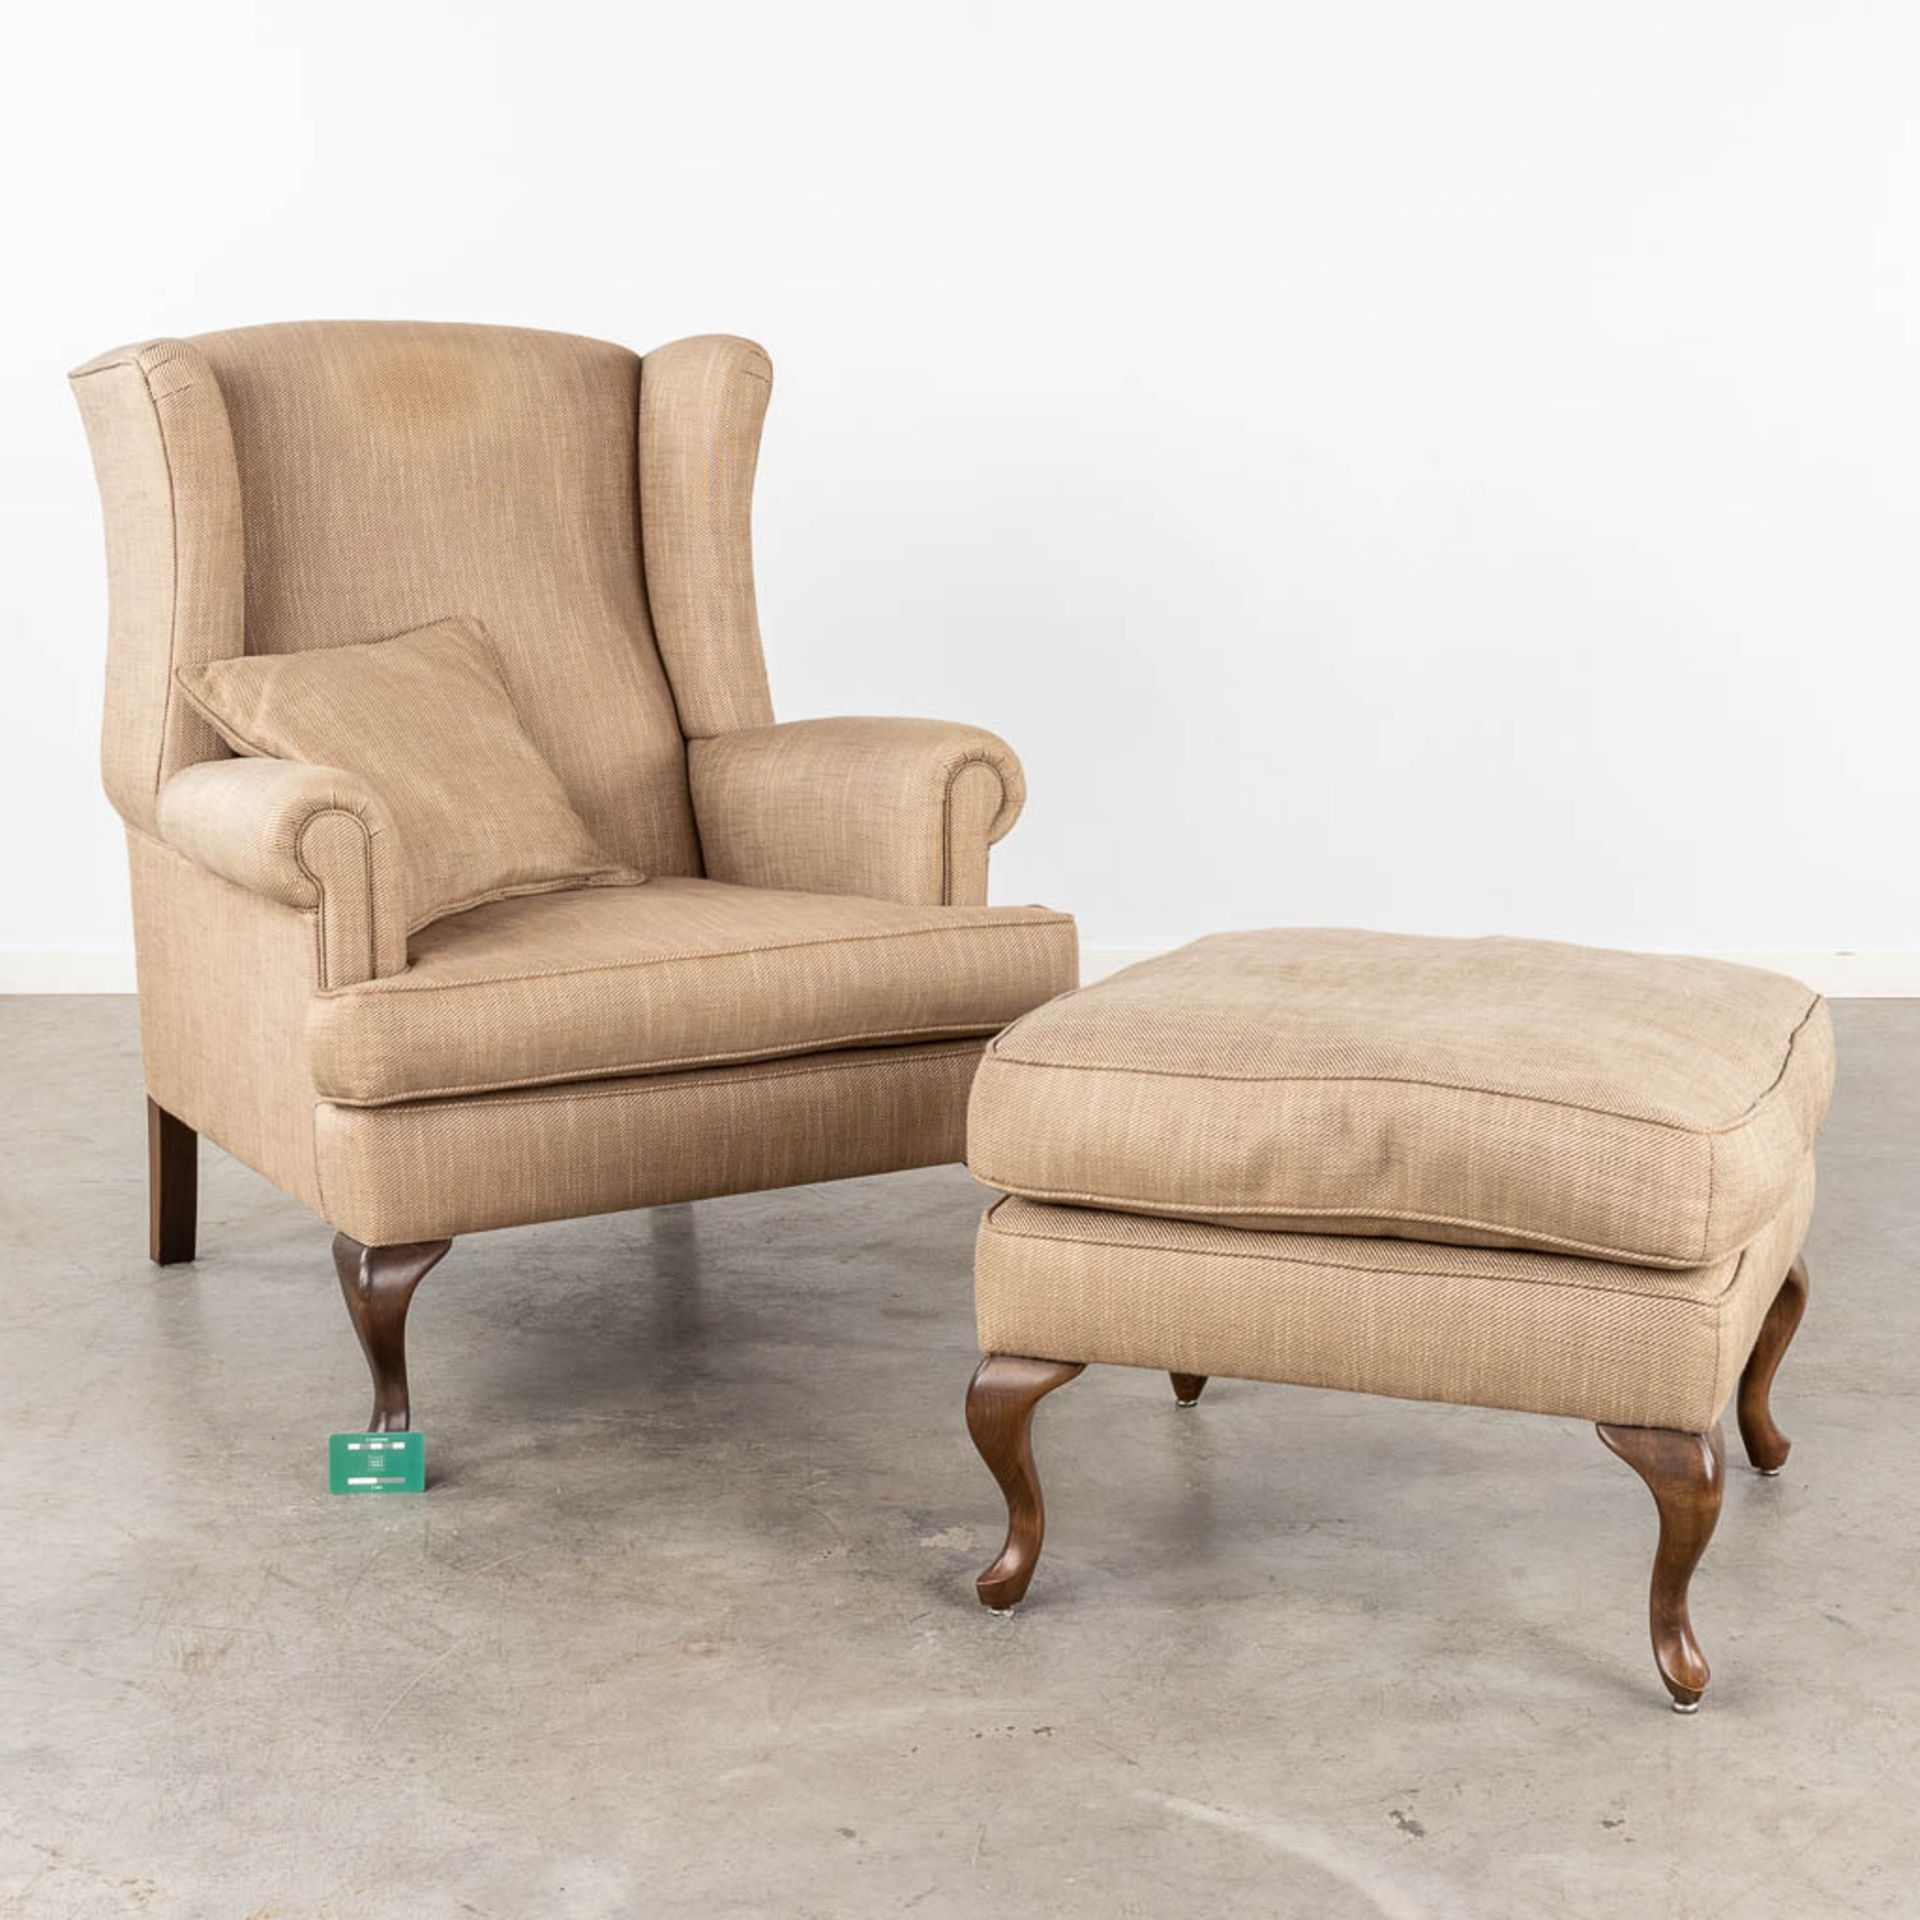 Marie's Corner, a wingback chair with ottoman. 21st C. (D:90 x W:84 x H:103 cm) - Image 2 of 13